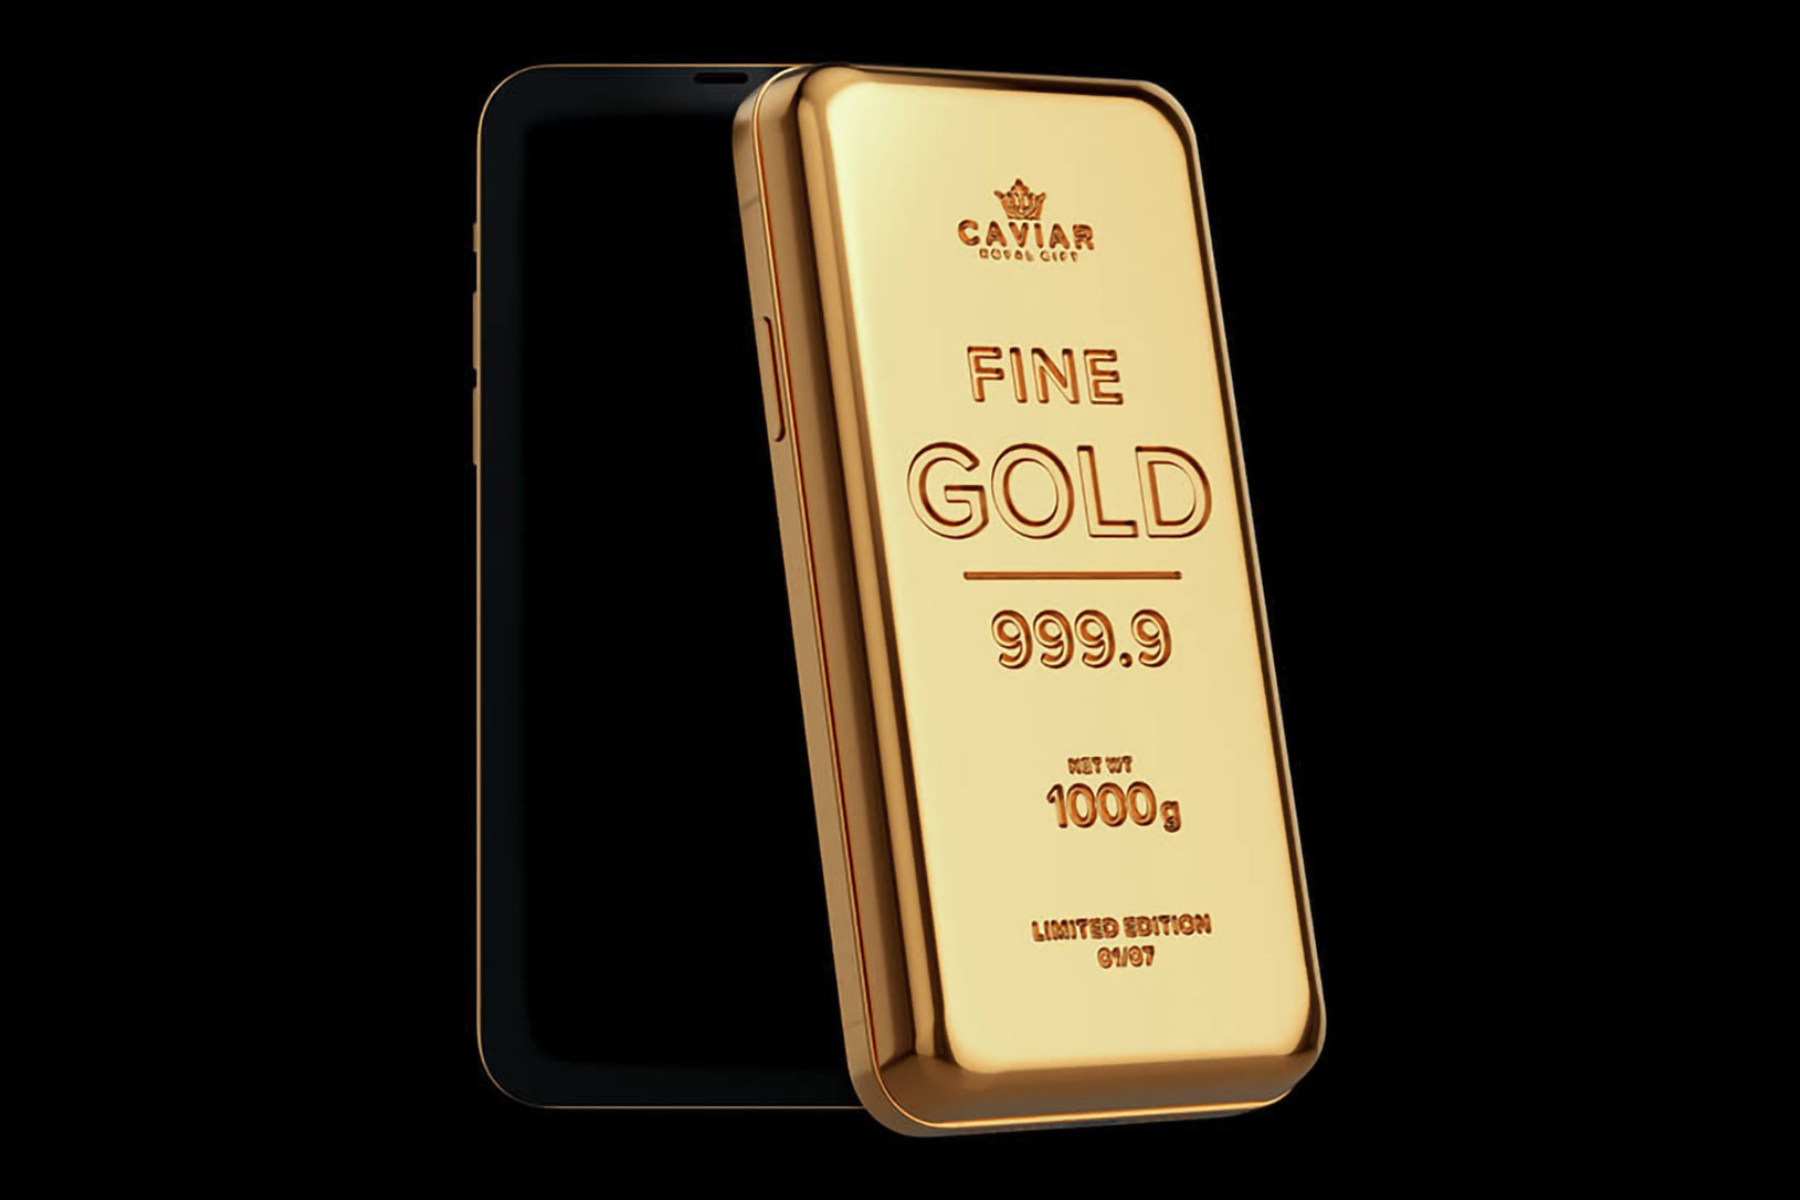 A gold bar leaning against a phone